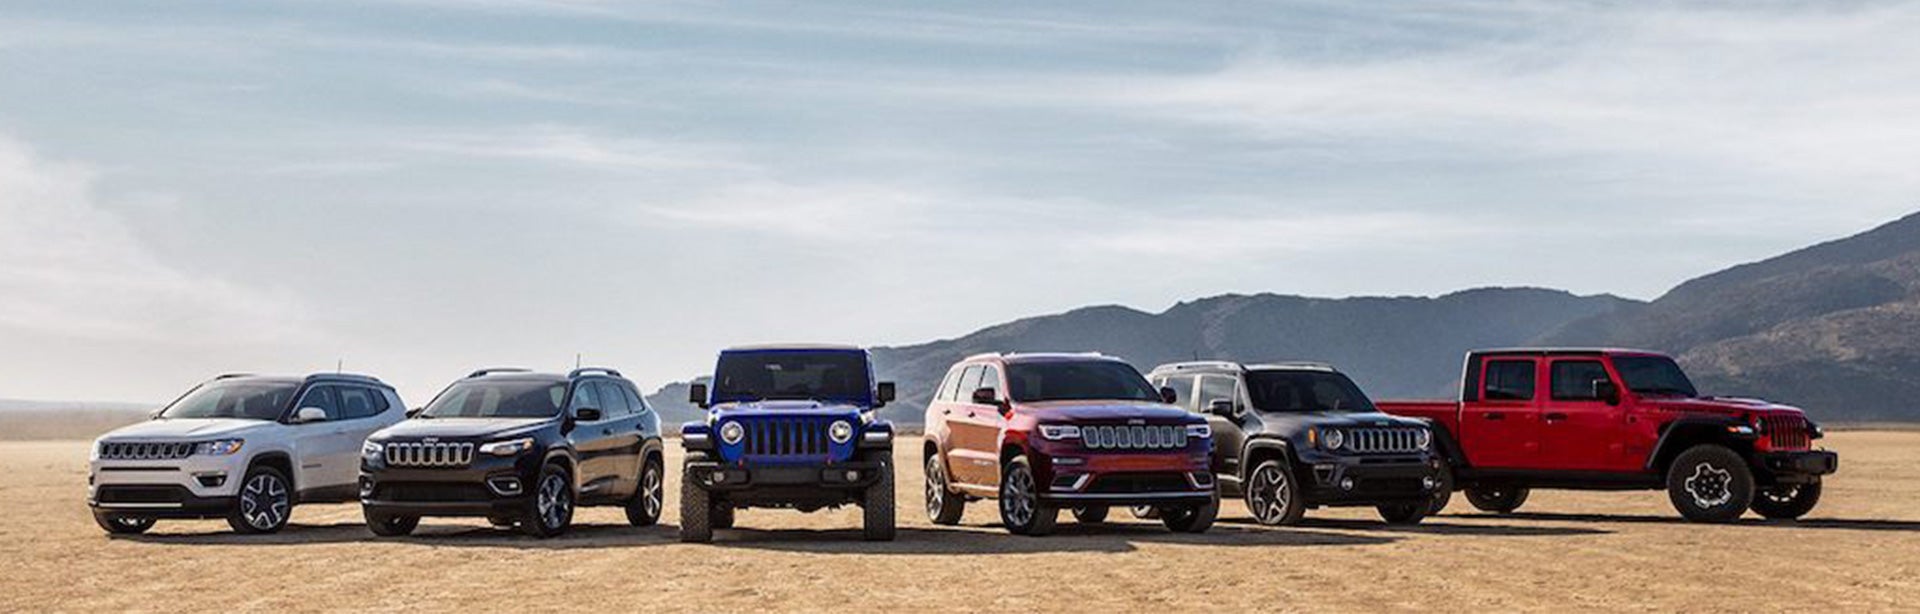 Pre-Order Your New Vehicle for 2022 at Prescott Brothers Chrysler, Dodge, Jeep, RAM in Mendota